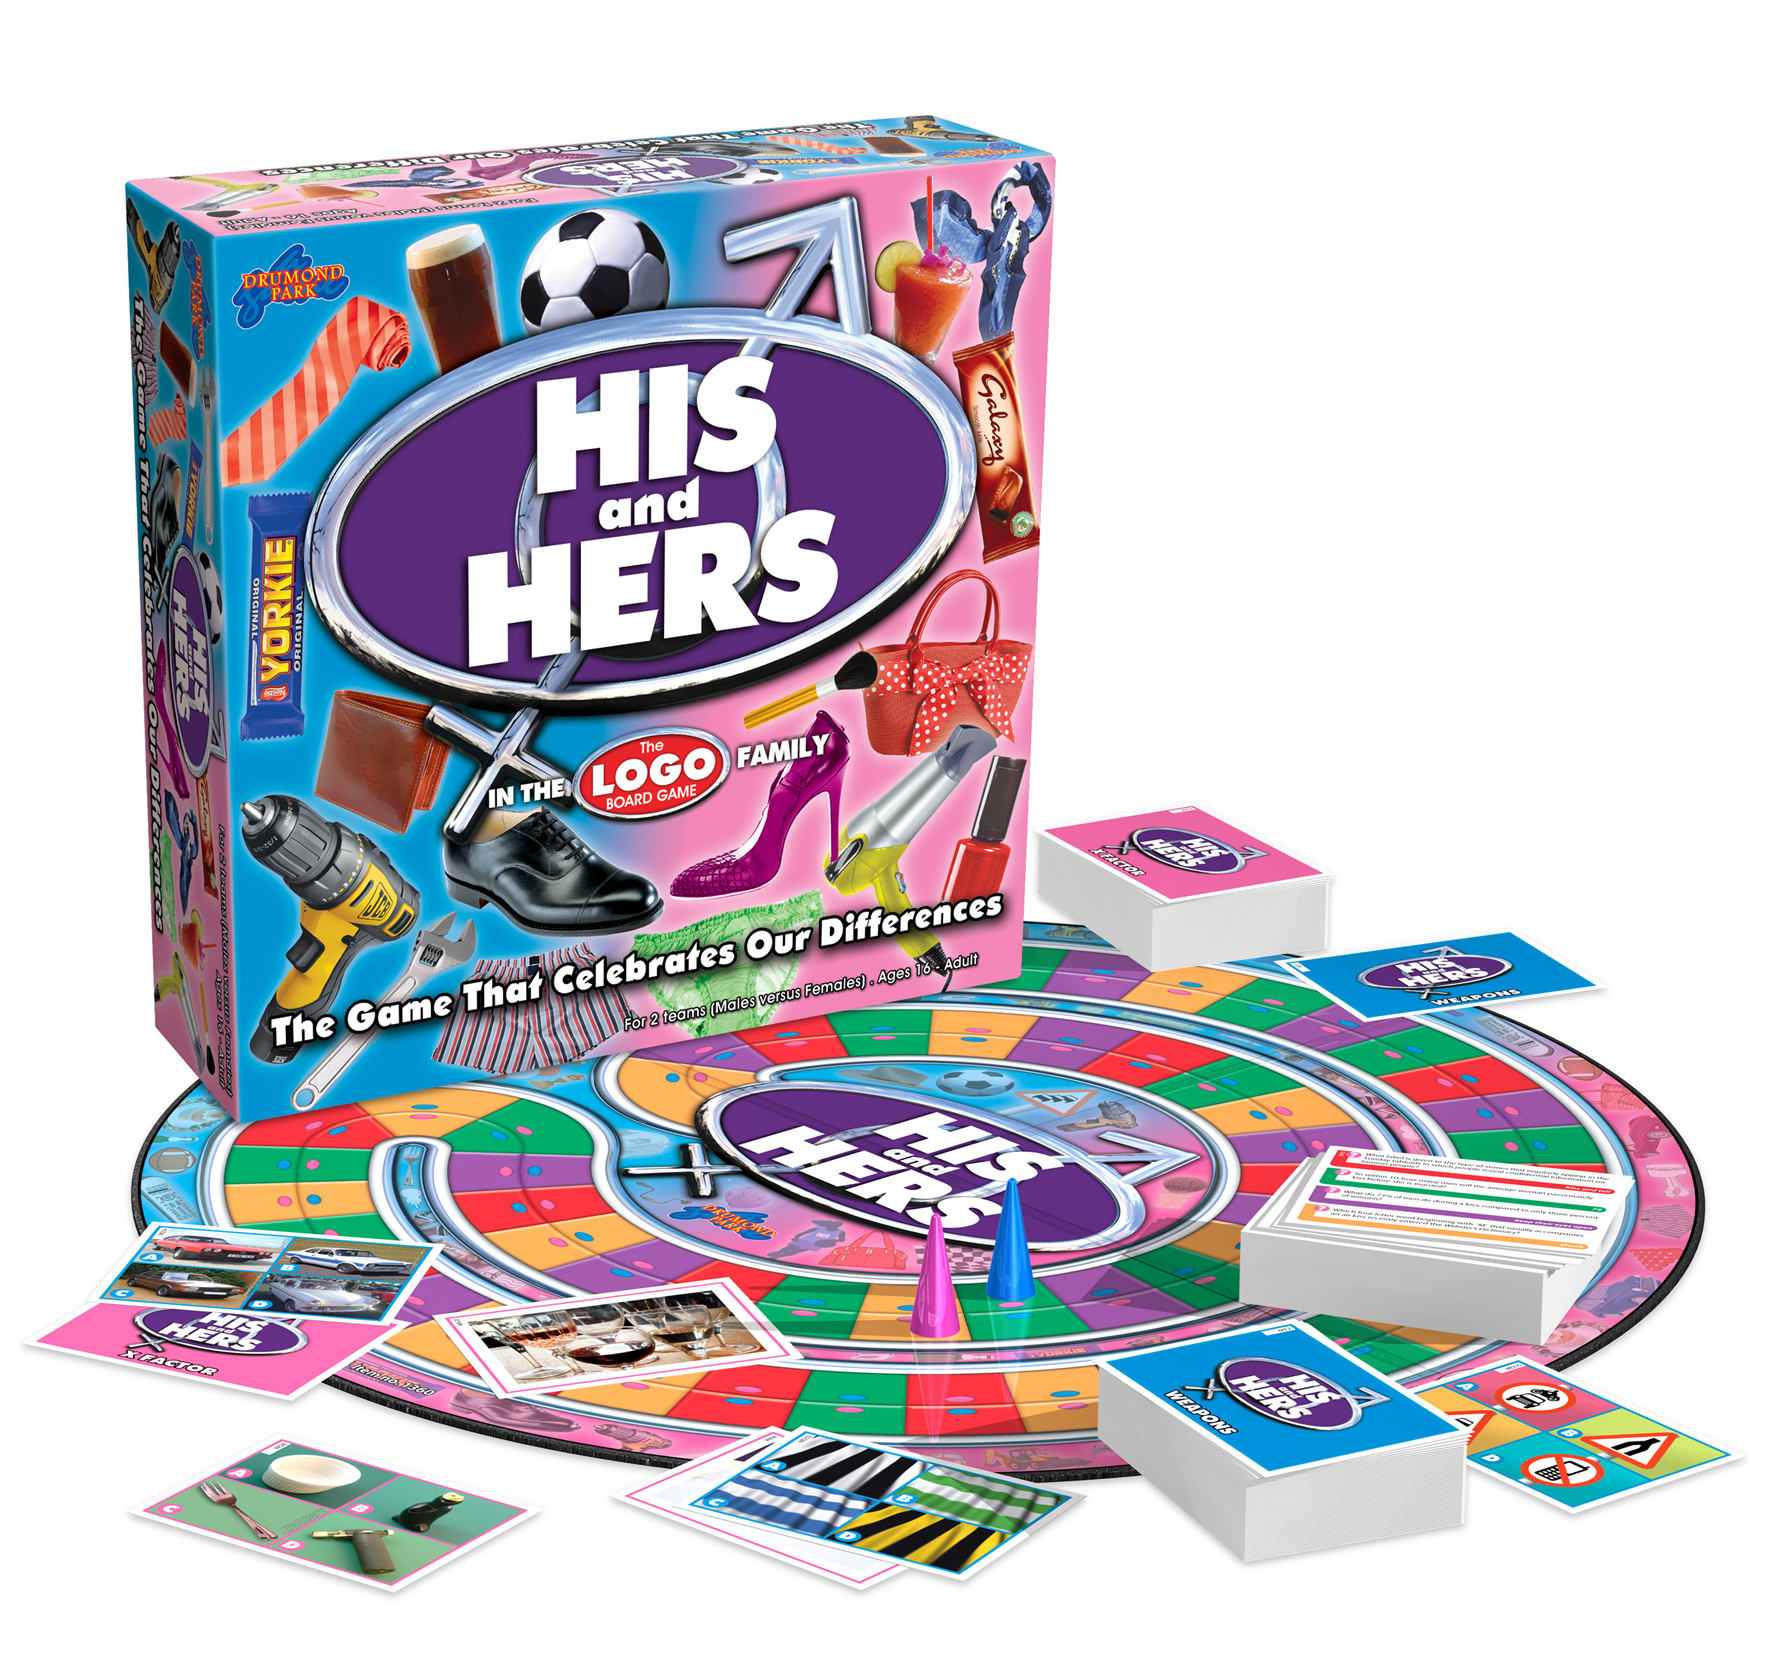 HIS & HERS board game